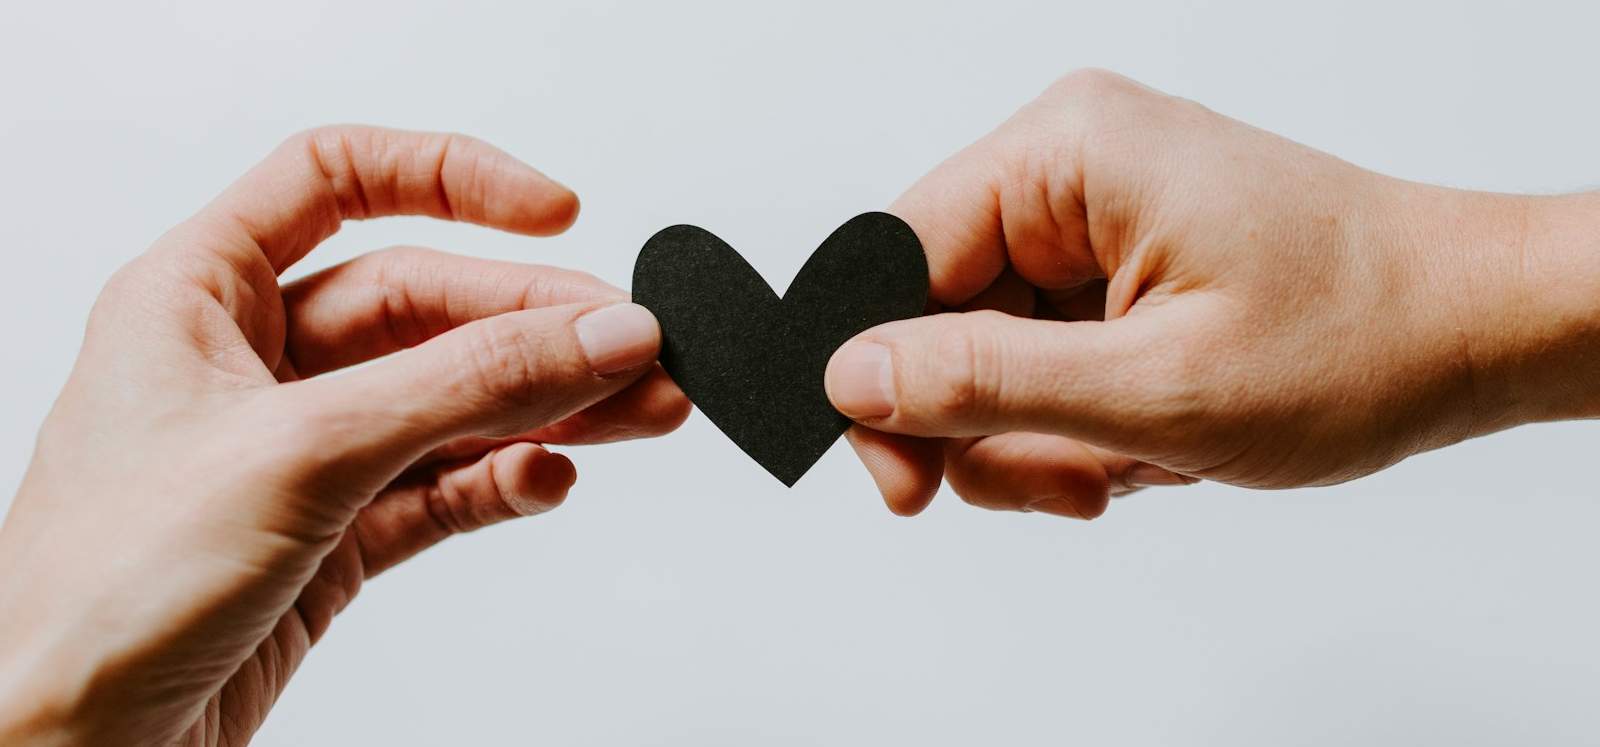 Two hands, each holding an opposite side of a paper heart.